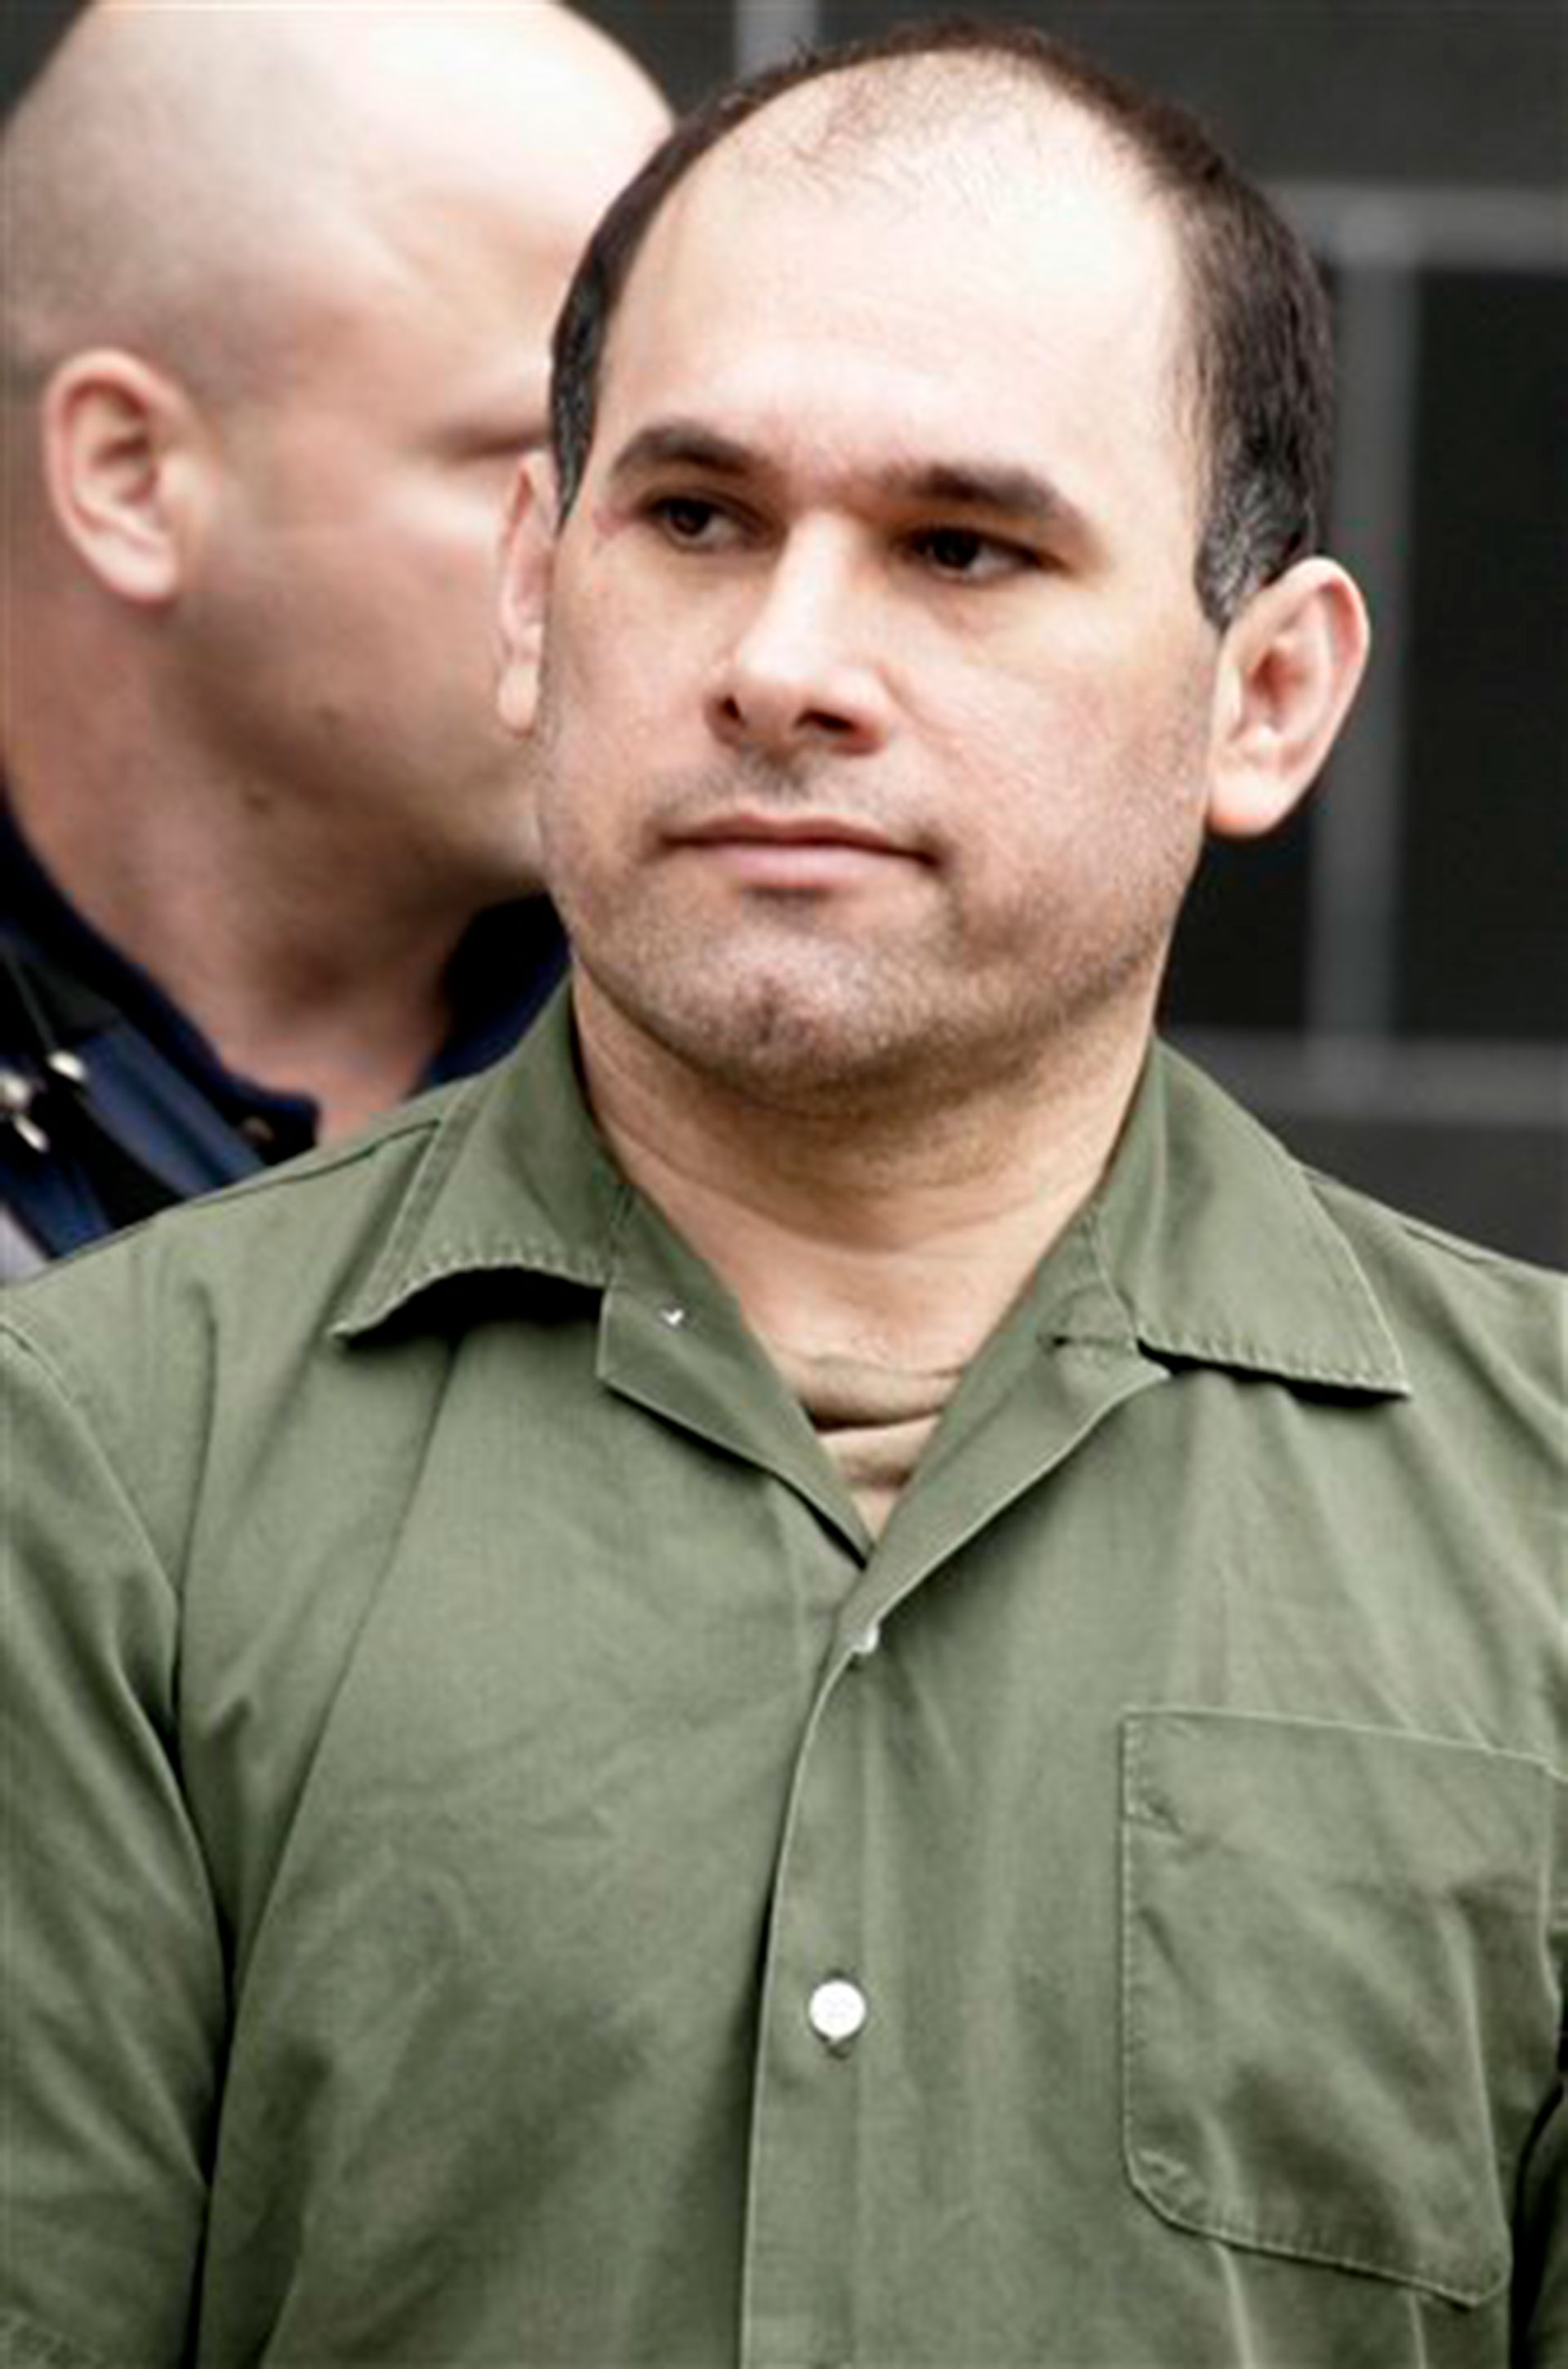 Osiel Cárdenas Guillén is known as one of the most violent hit men and drug traffickers in the criminal world (photo: special)